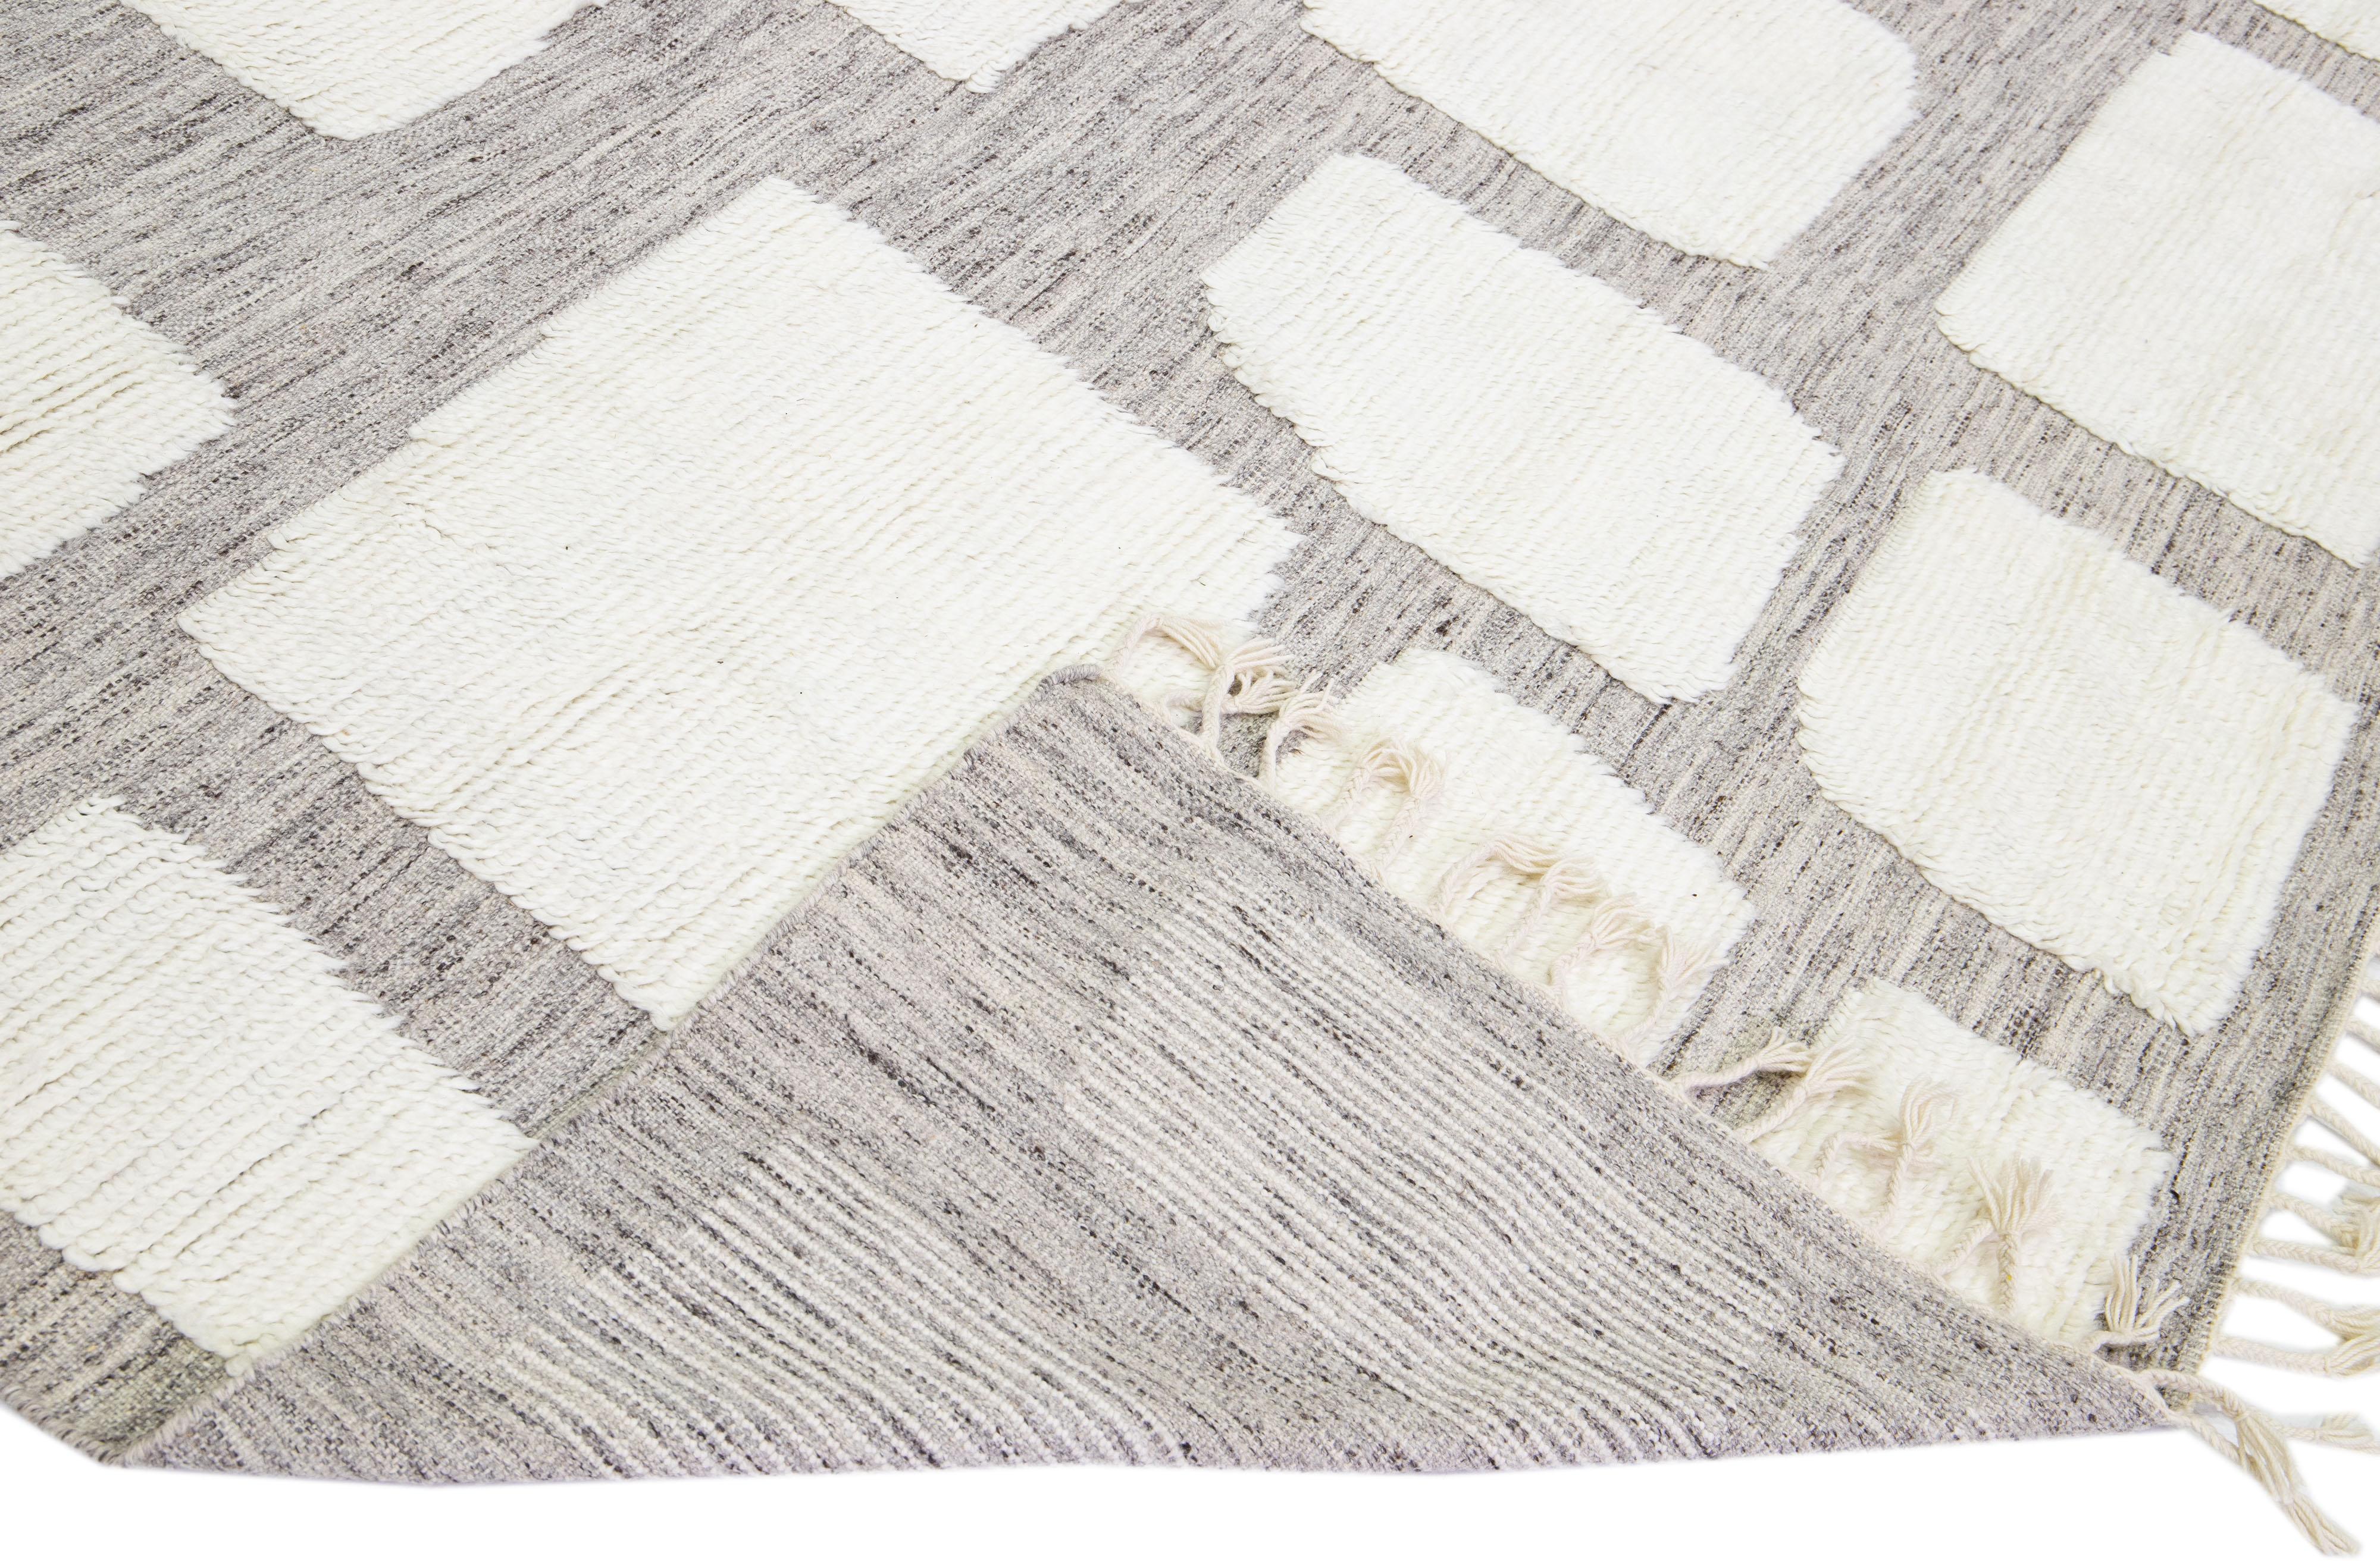 Beautiful modern Moroccan style hand-knotted wool rug with a light gray field and ivory accents in a gorgeous geometric high pile design.

This rug measures: 12' x 14'11